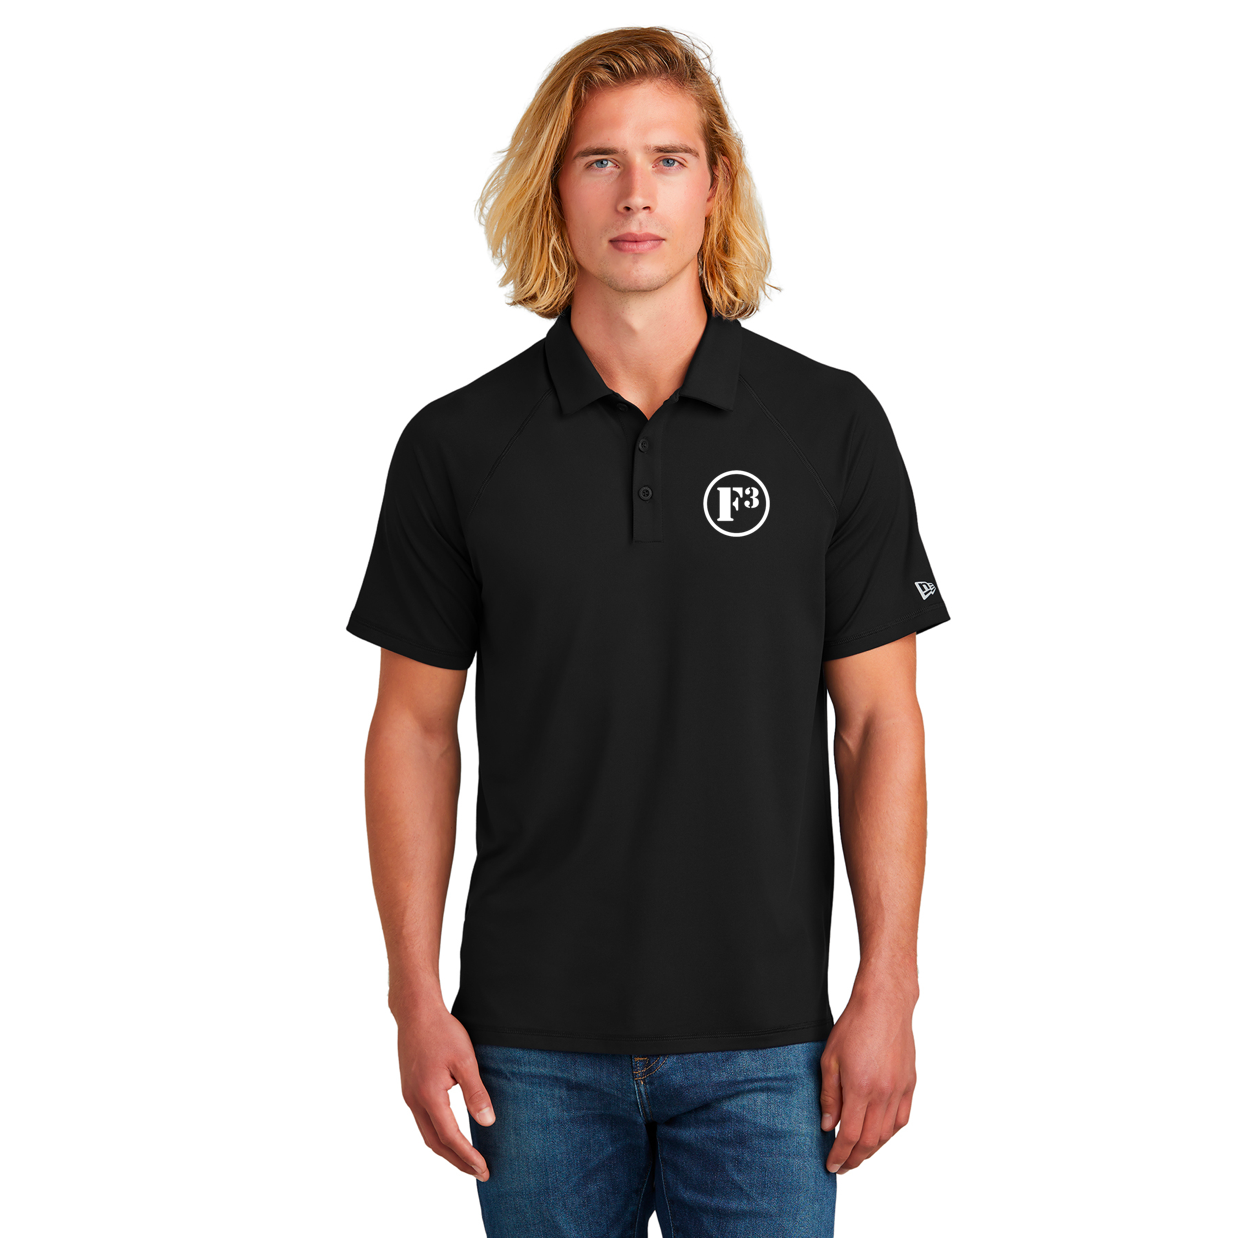 CLEARANCE ITEM - F3 New Era Power Polo (Black-Small-Embroidered)